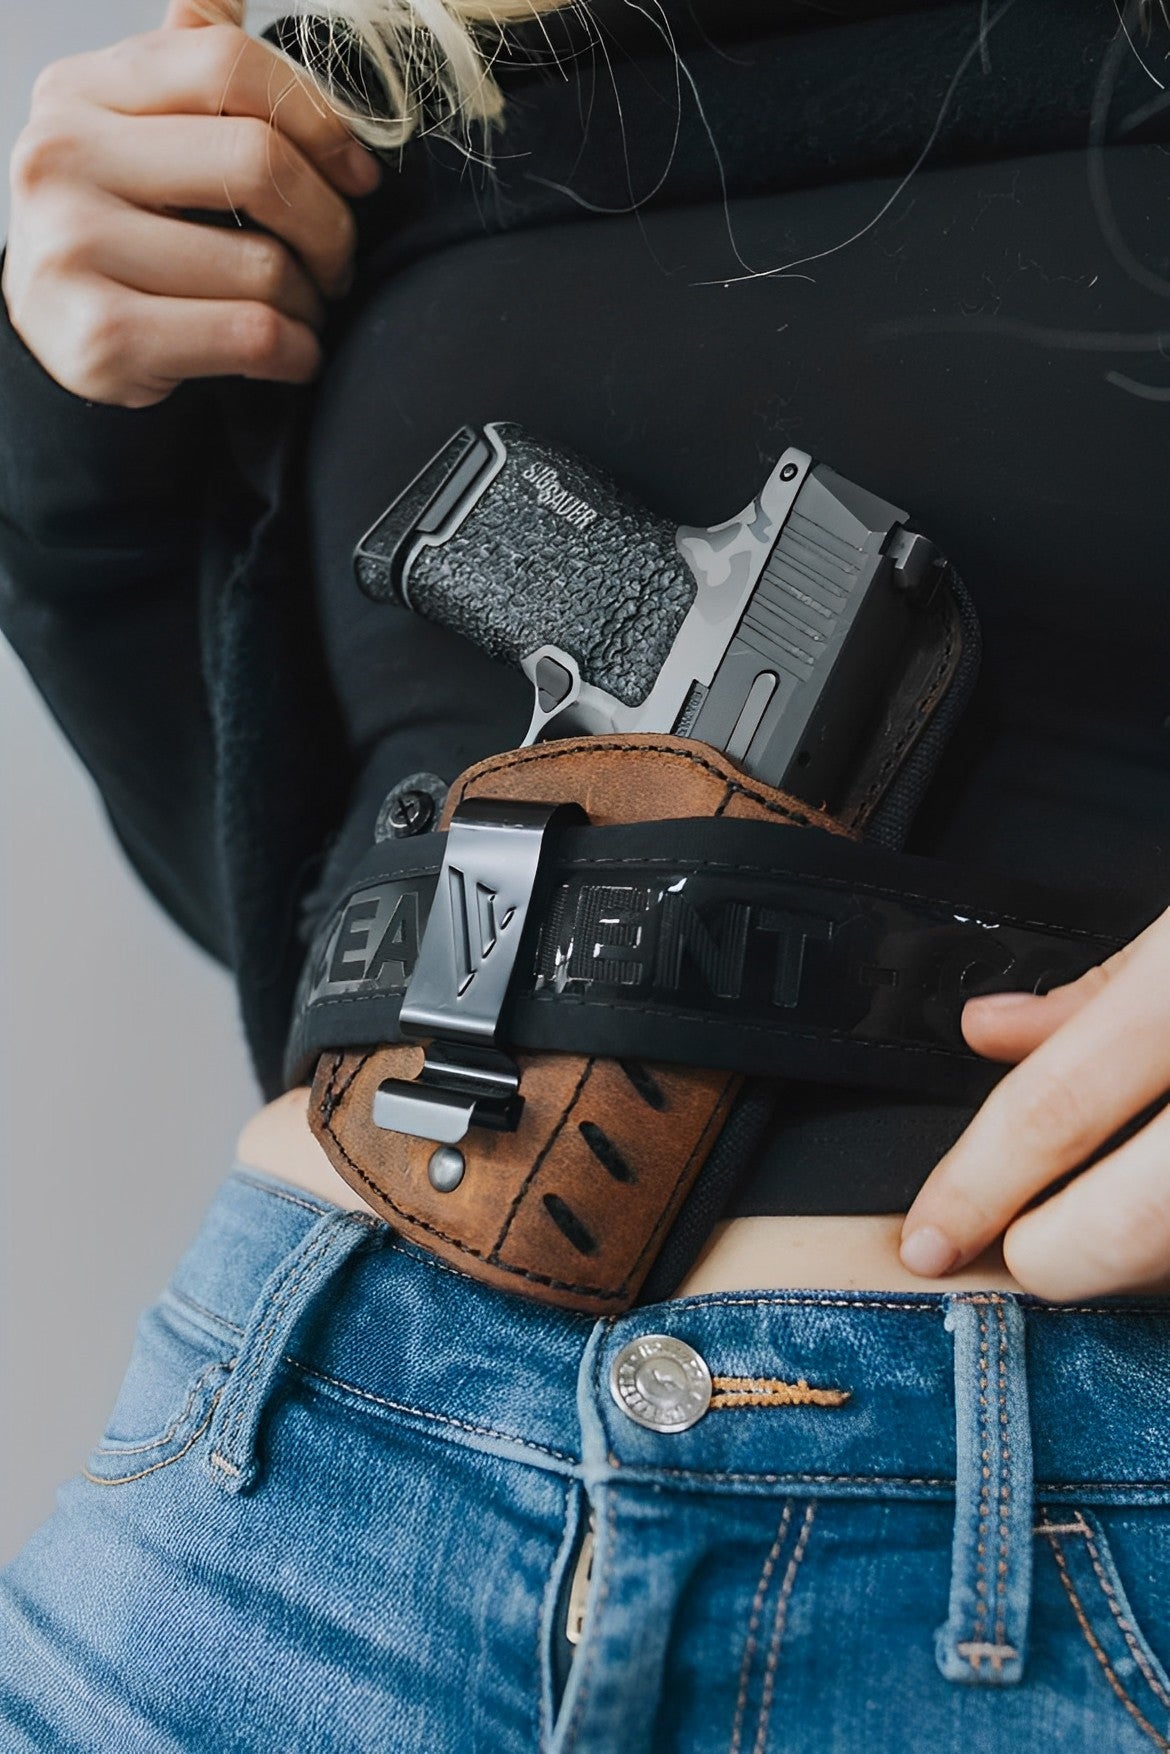 Concealed Carry Holsters for Skinny Guys